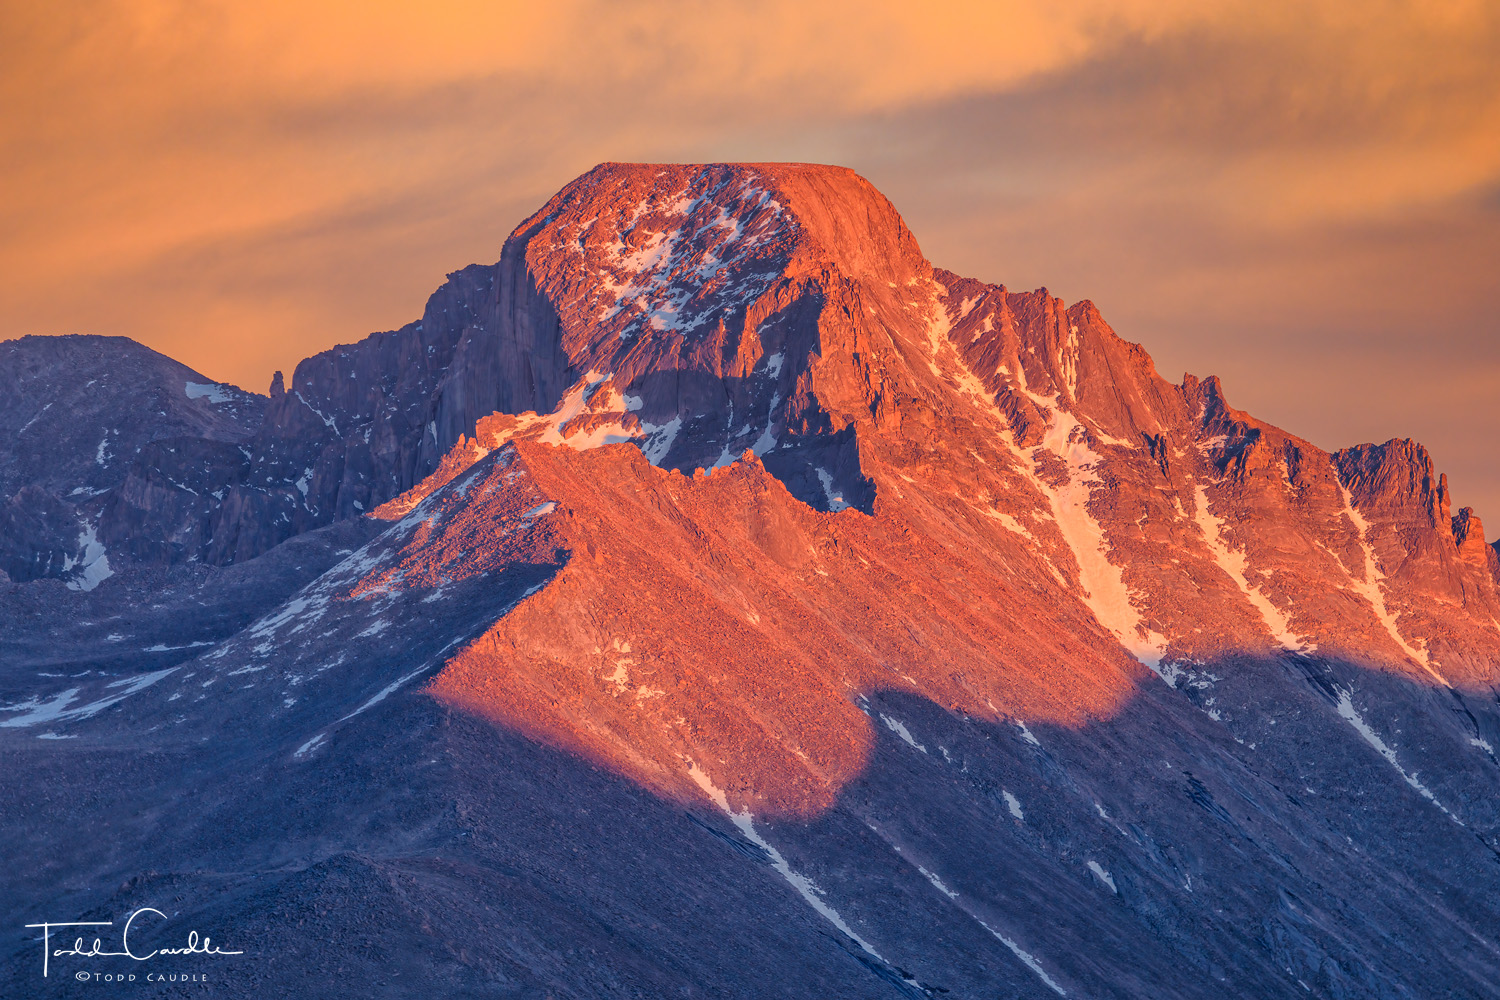 Alpenglow light paints Longs Peak in colorful hues at sunset.